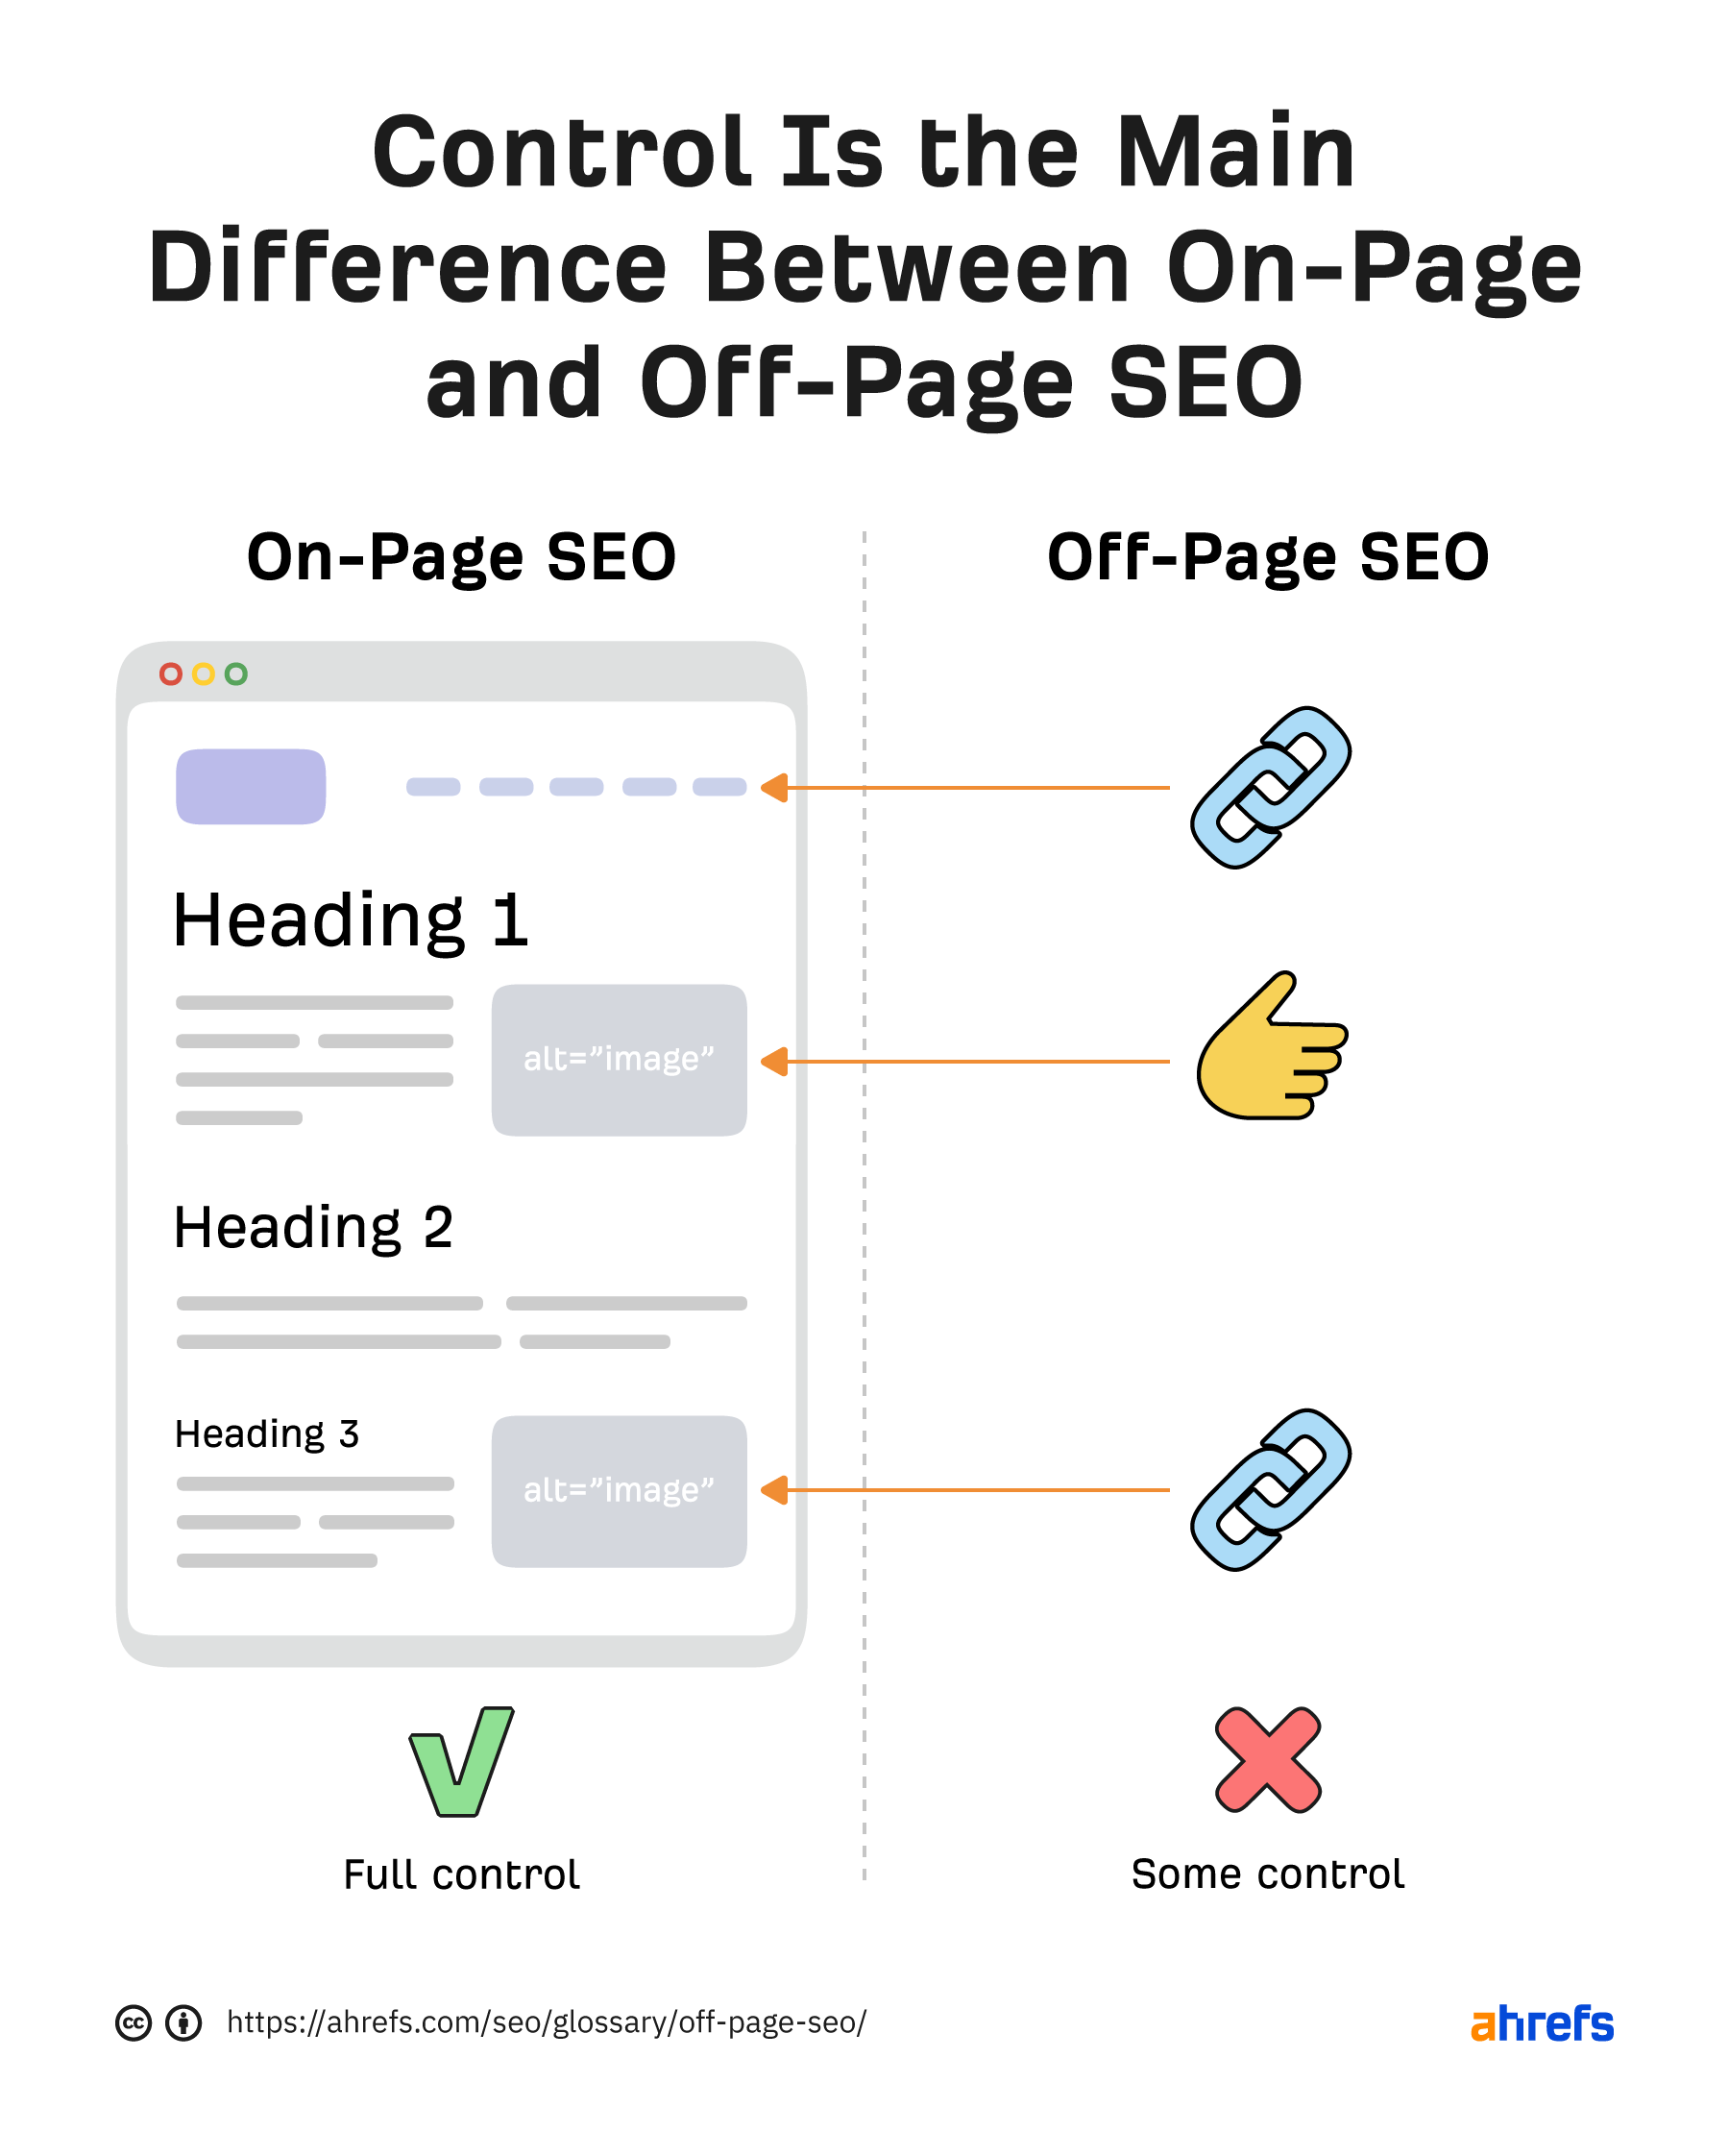 Control is the main difference between off-page and on-page SEO